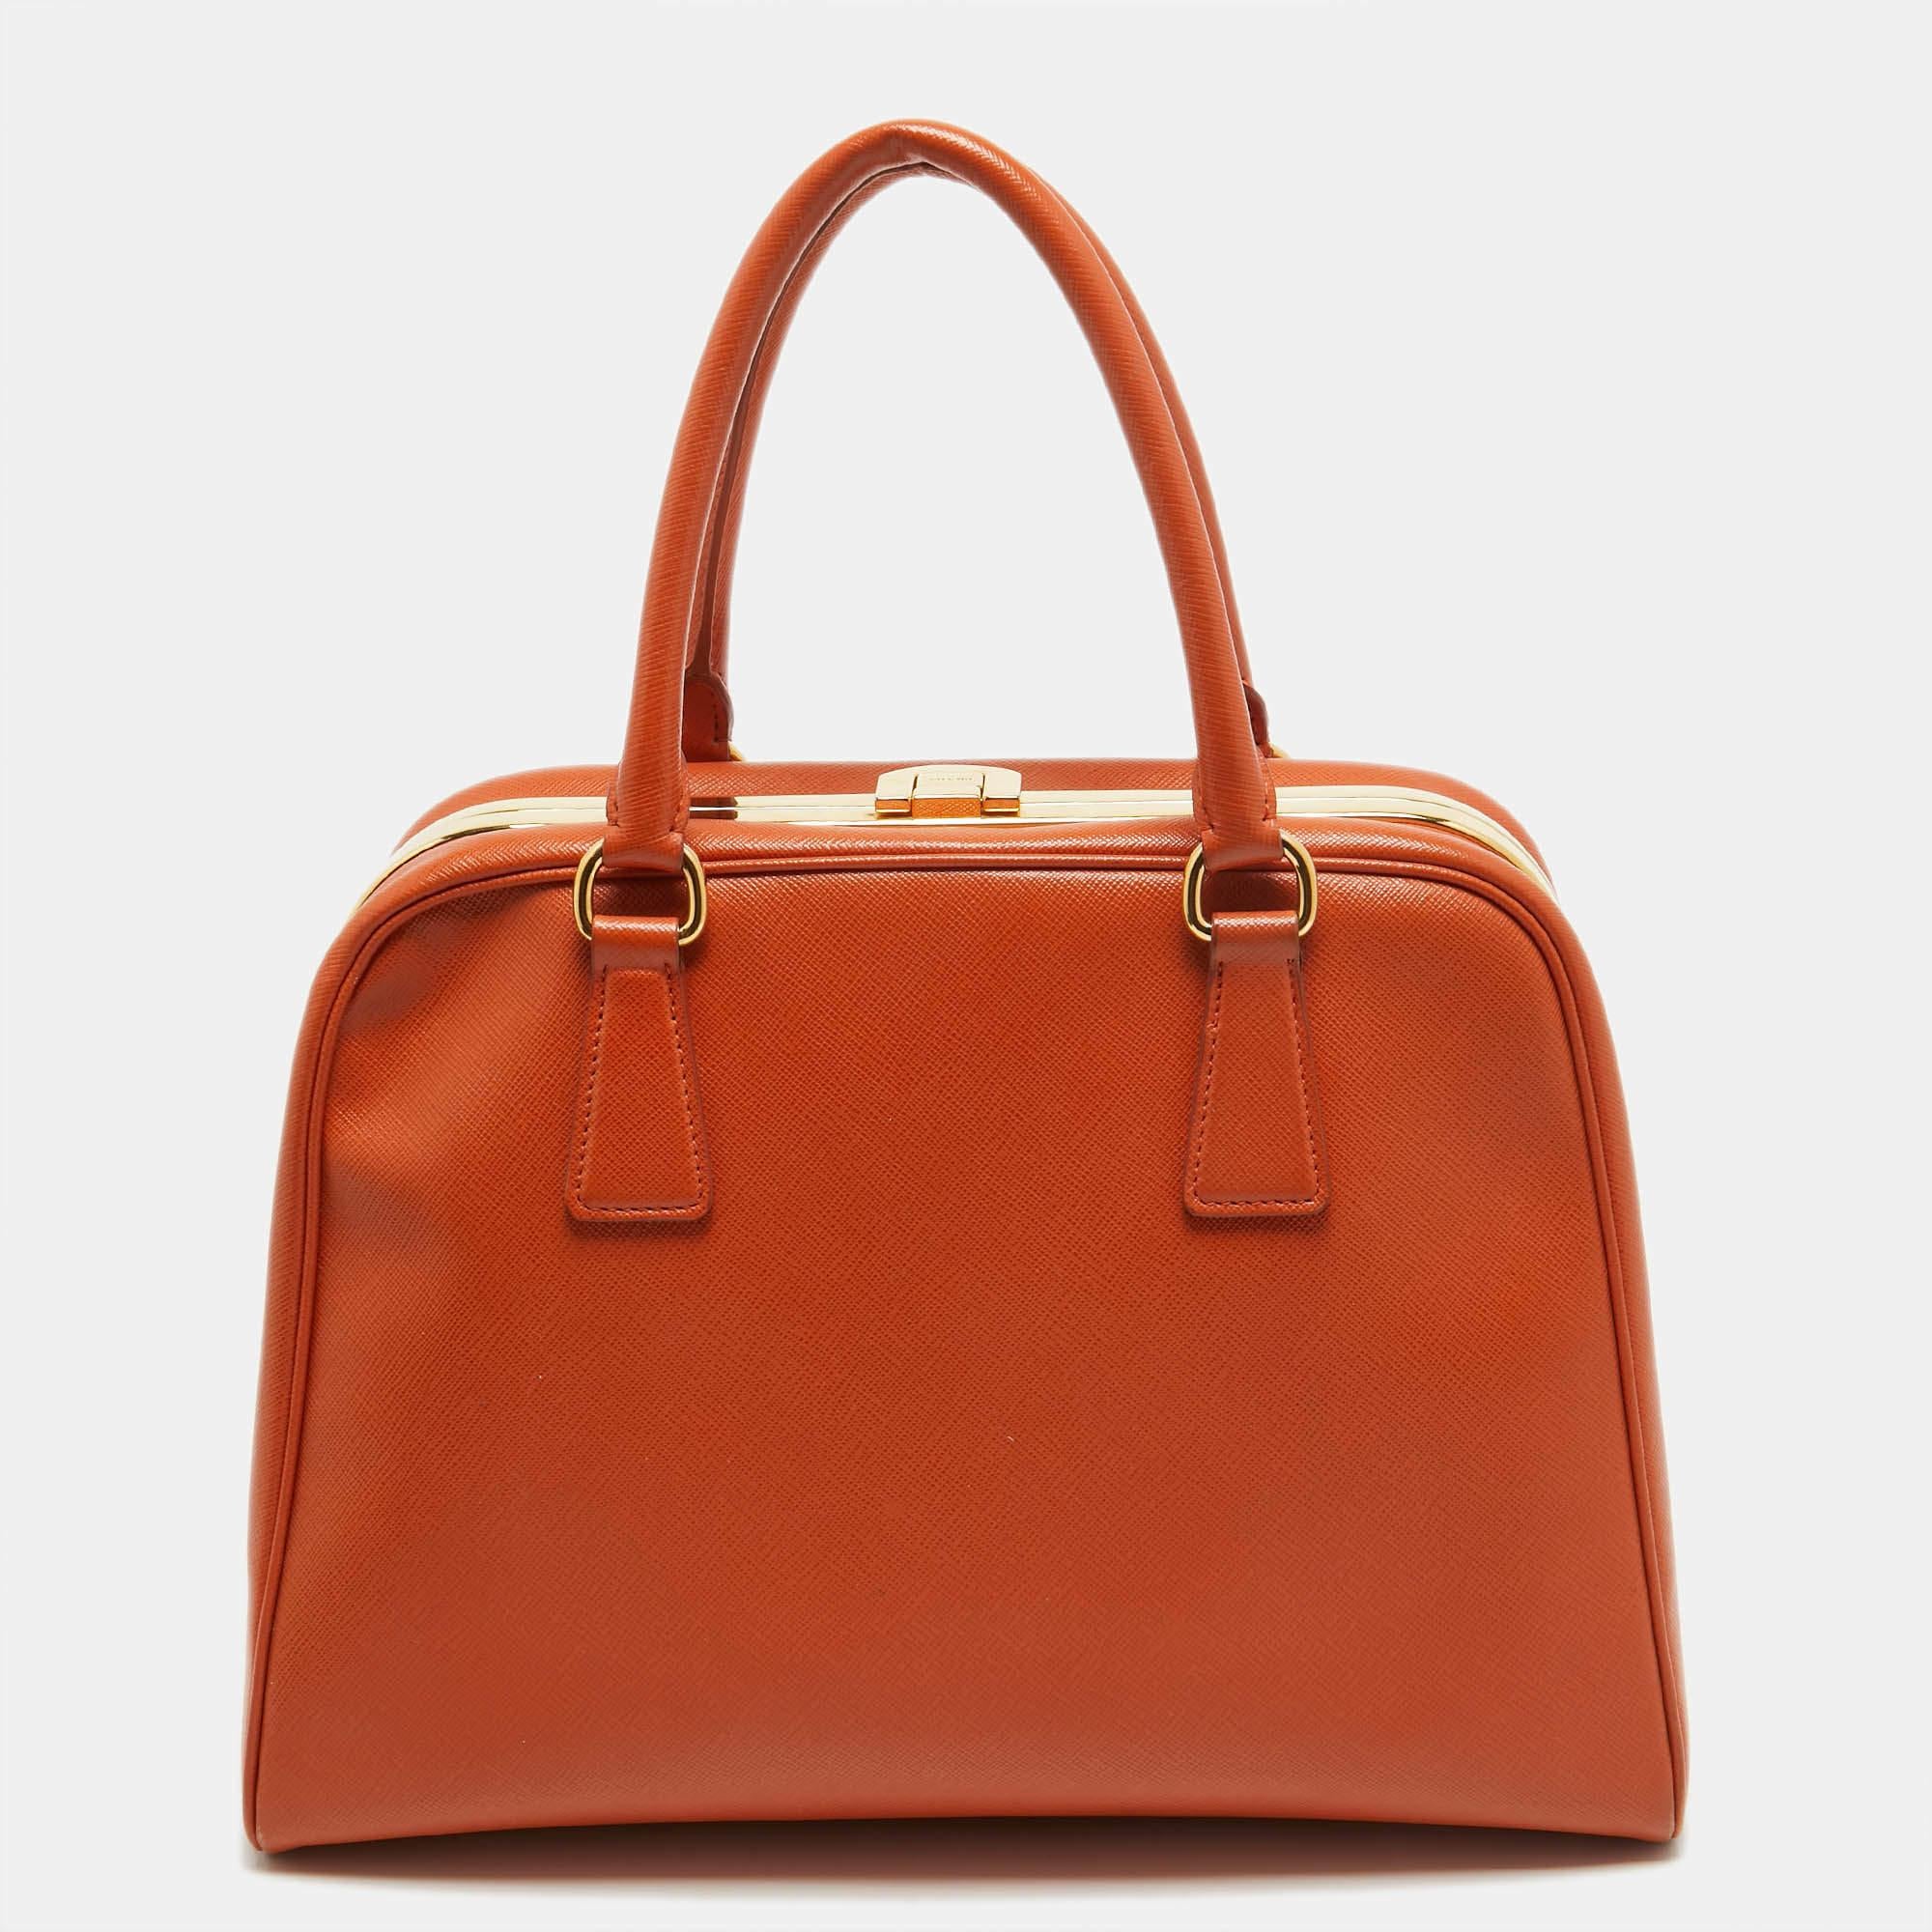 The fashion house’s tradition of excellence, coupled with modern design sensibilities, works to make this Prada orange satchel one of a kind. It's a fabulous accessory for everyday use.

Includes: Authenticity Card, Info Booklet
